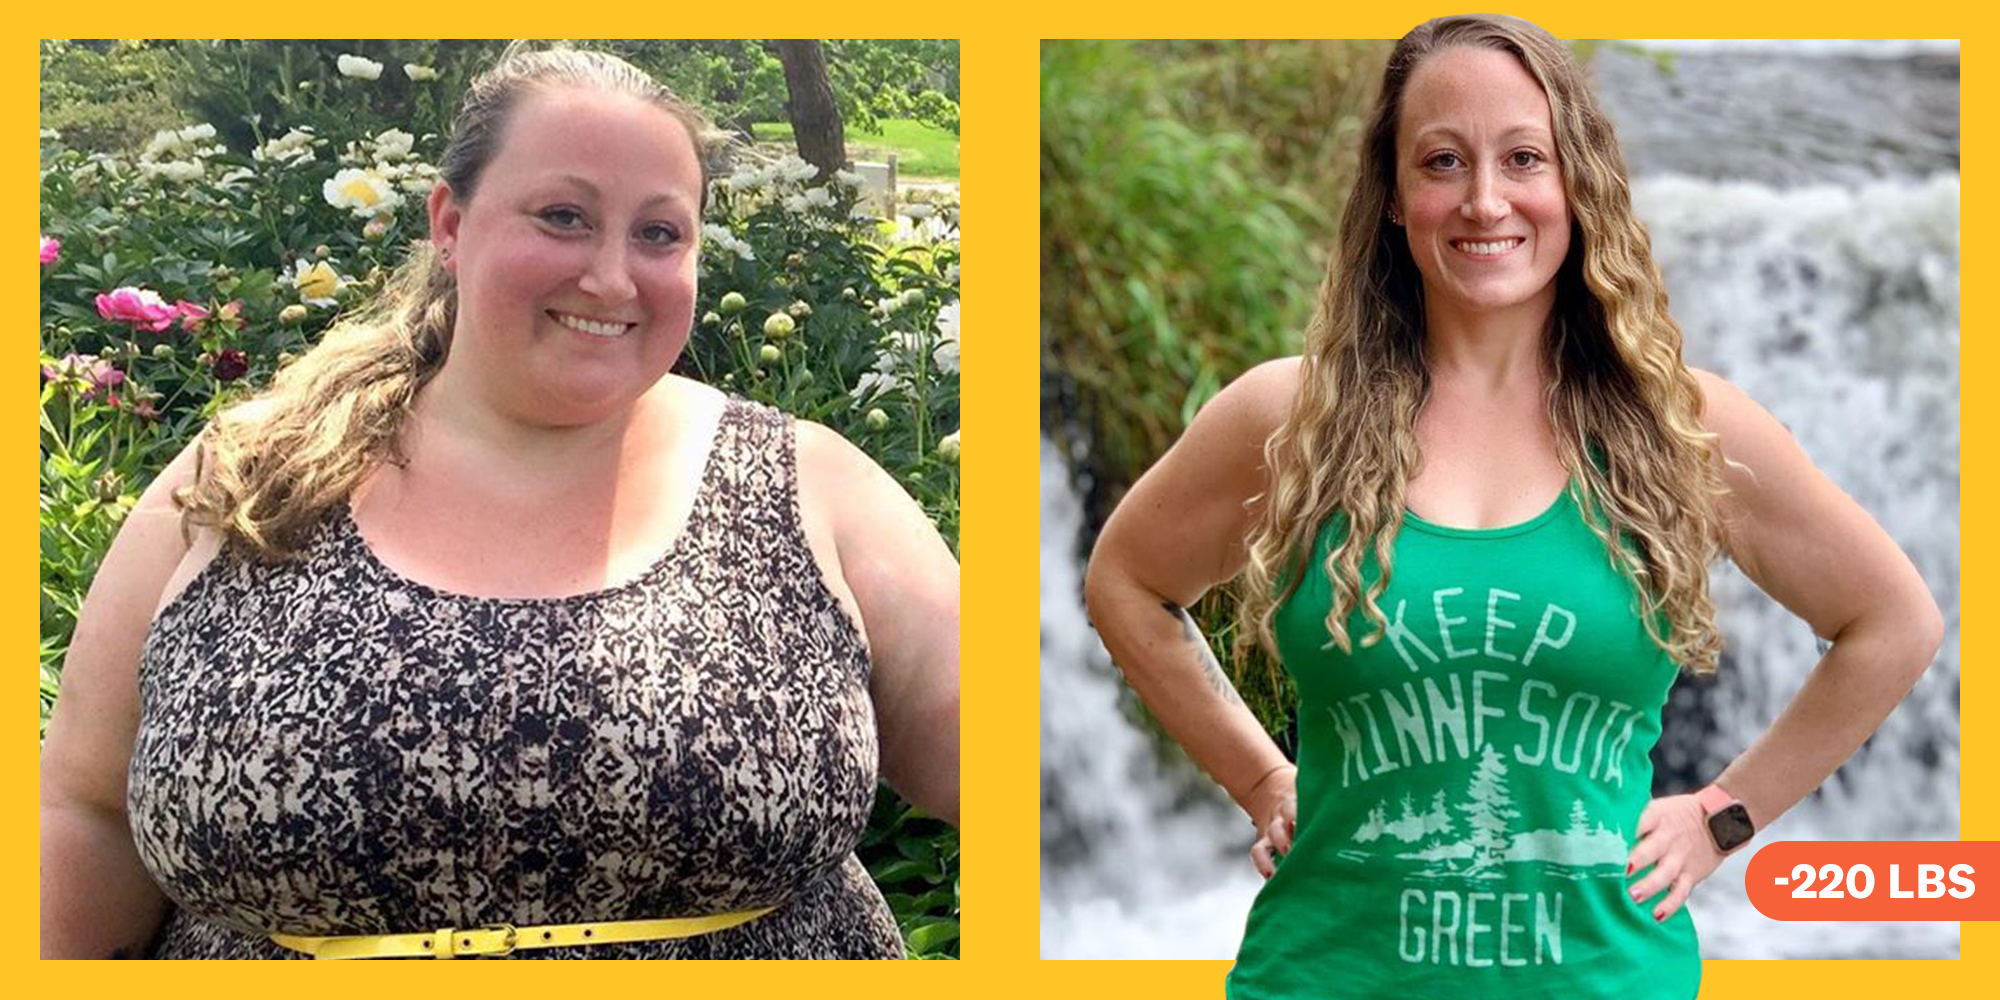 The Keto Diet And Rock Climbing Led To My 220-Lb. Weight Loss'